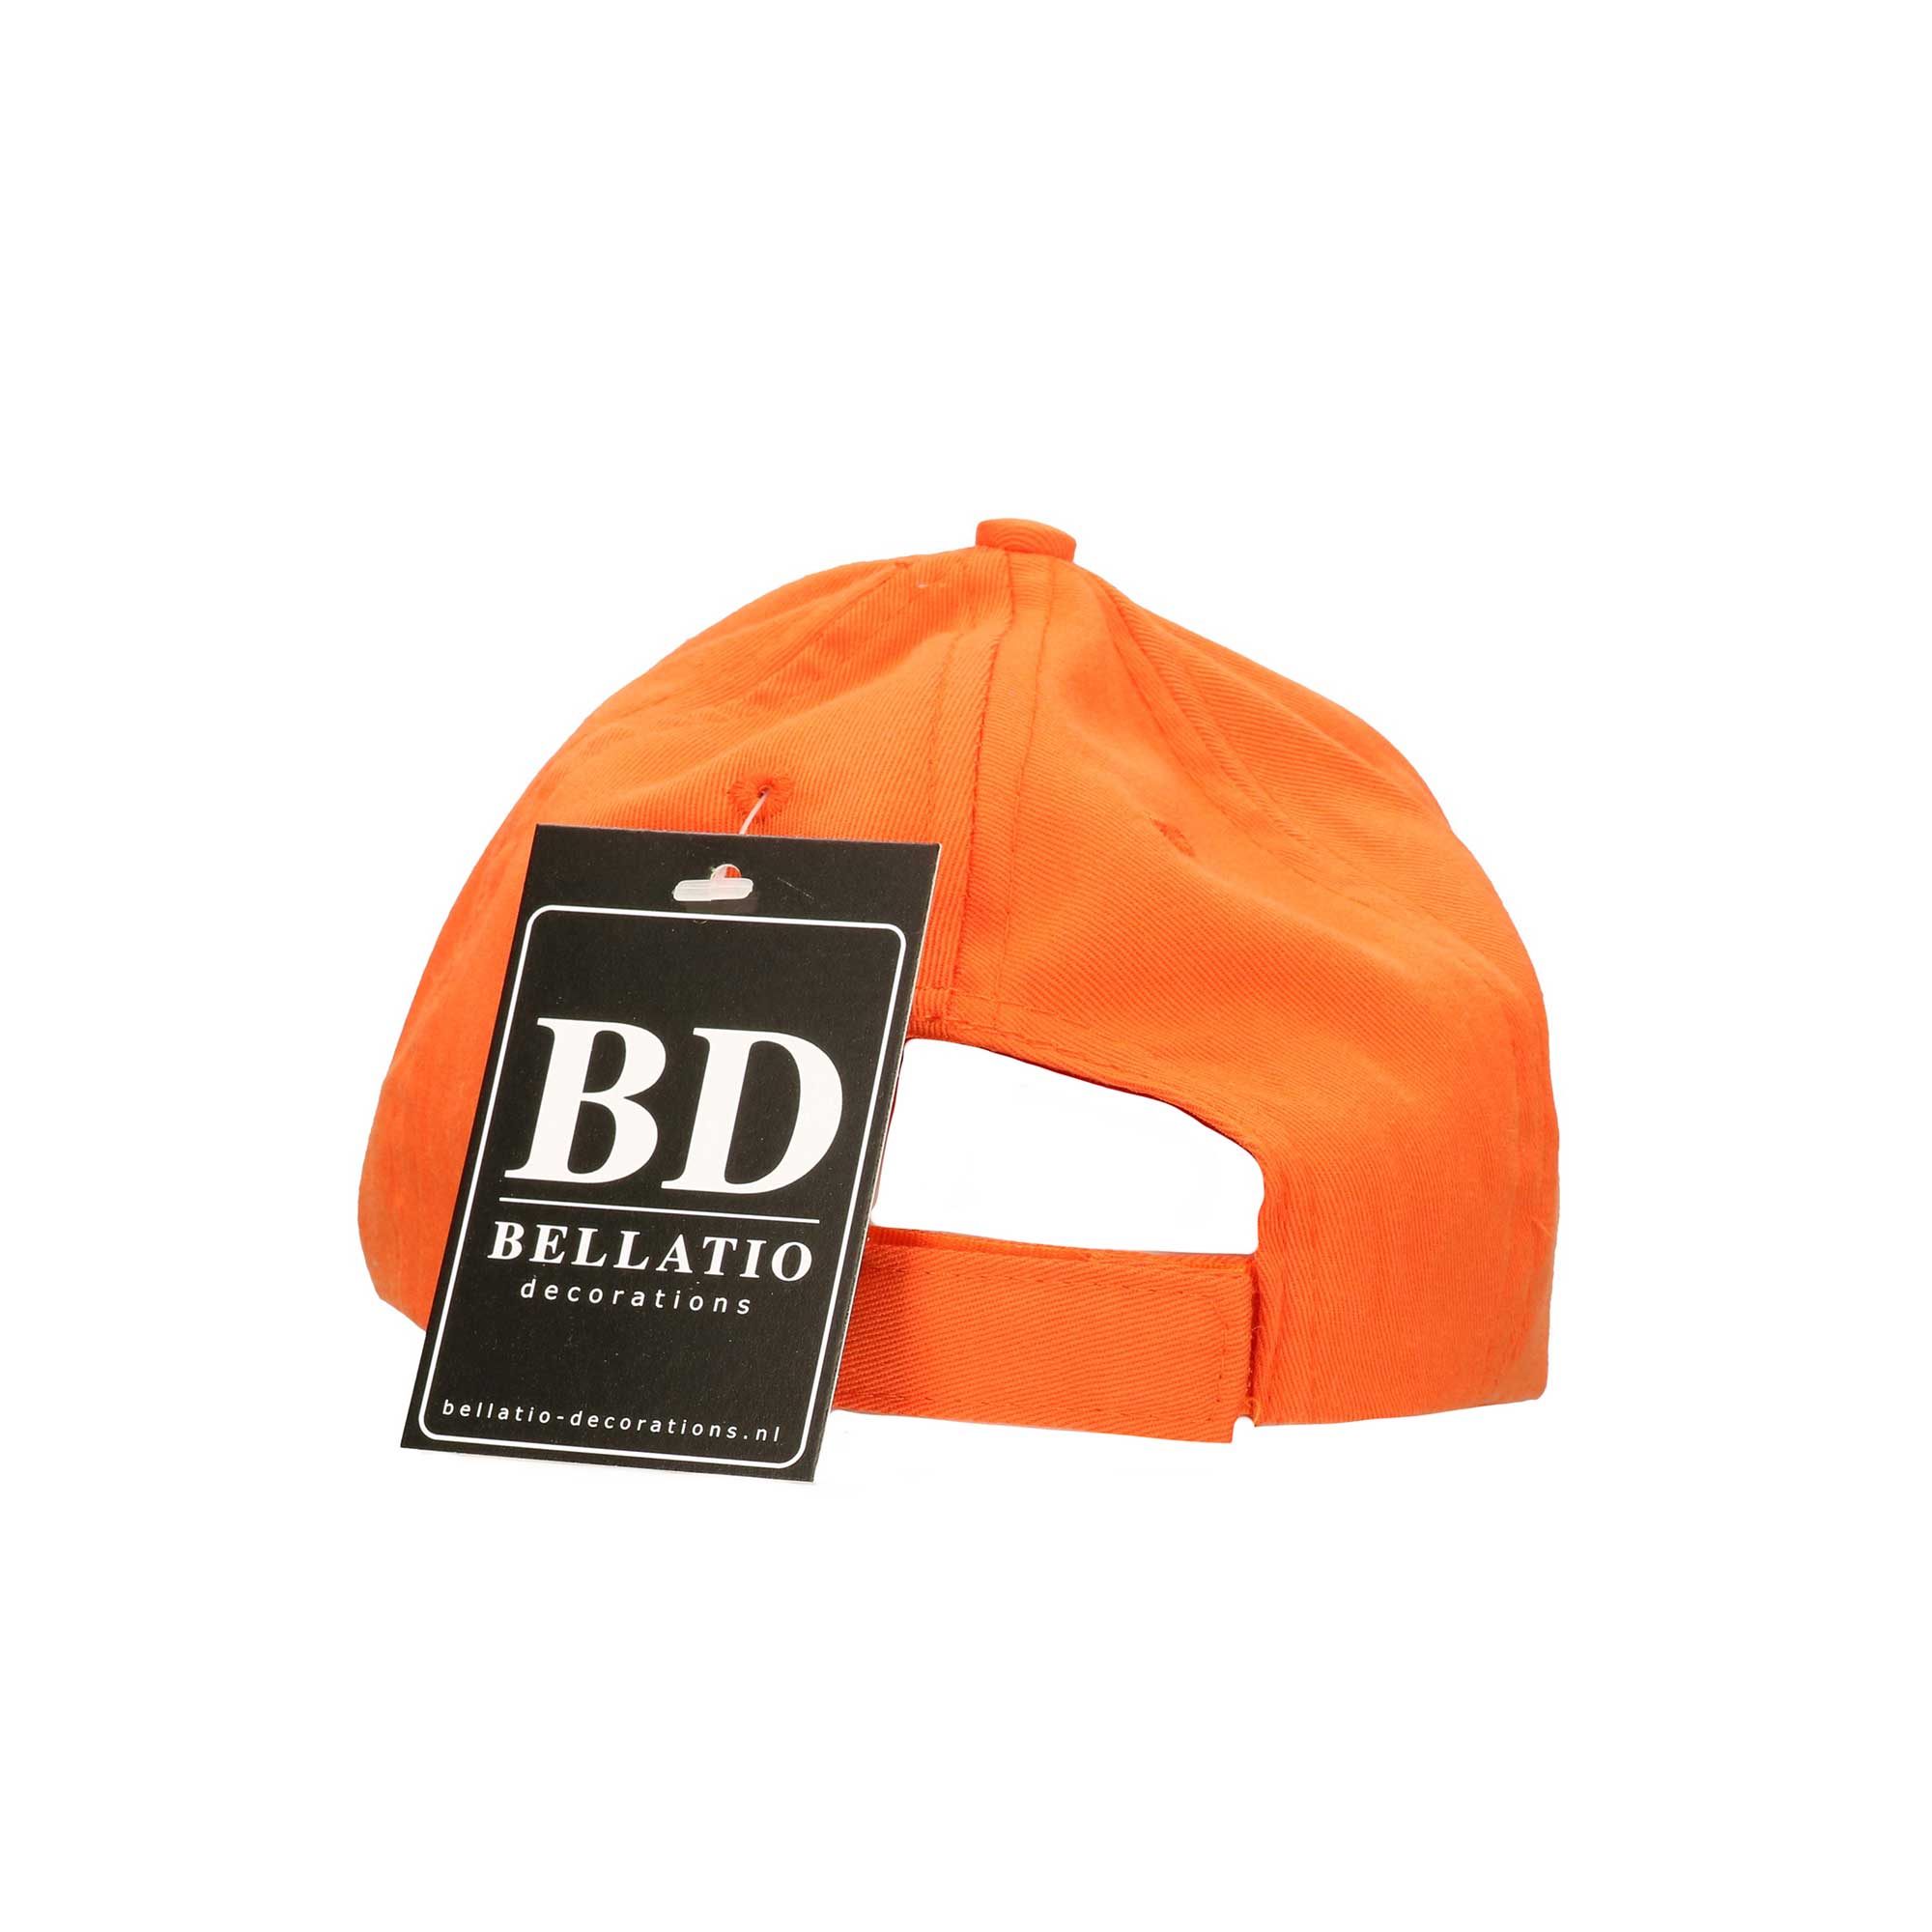 Crew cap orange with white letters for men and women